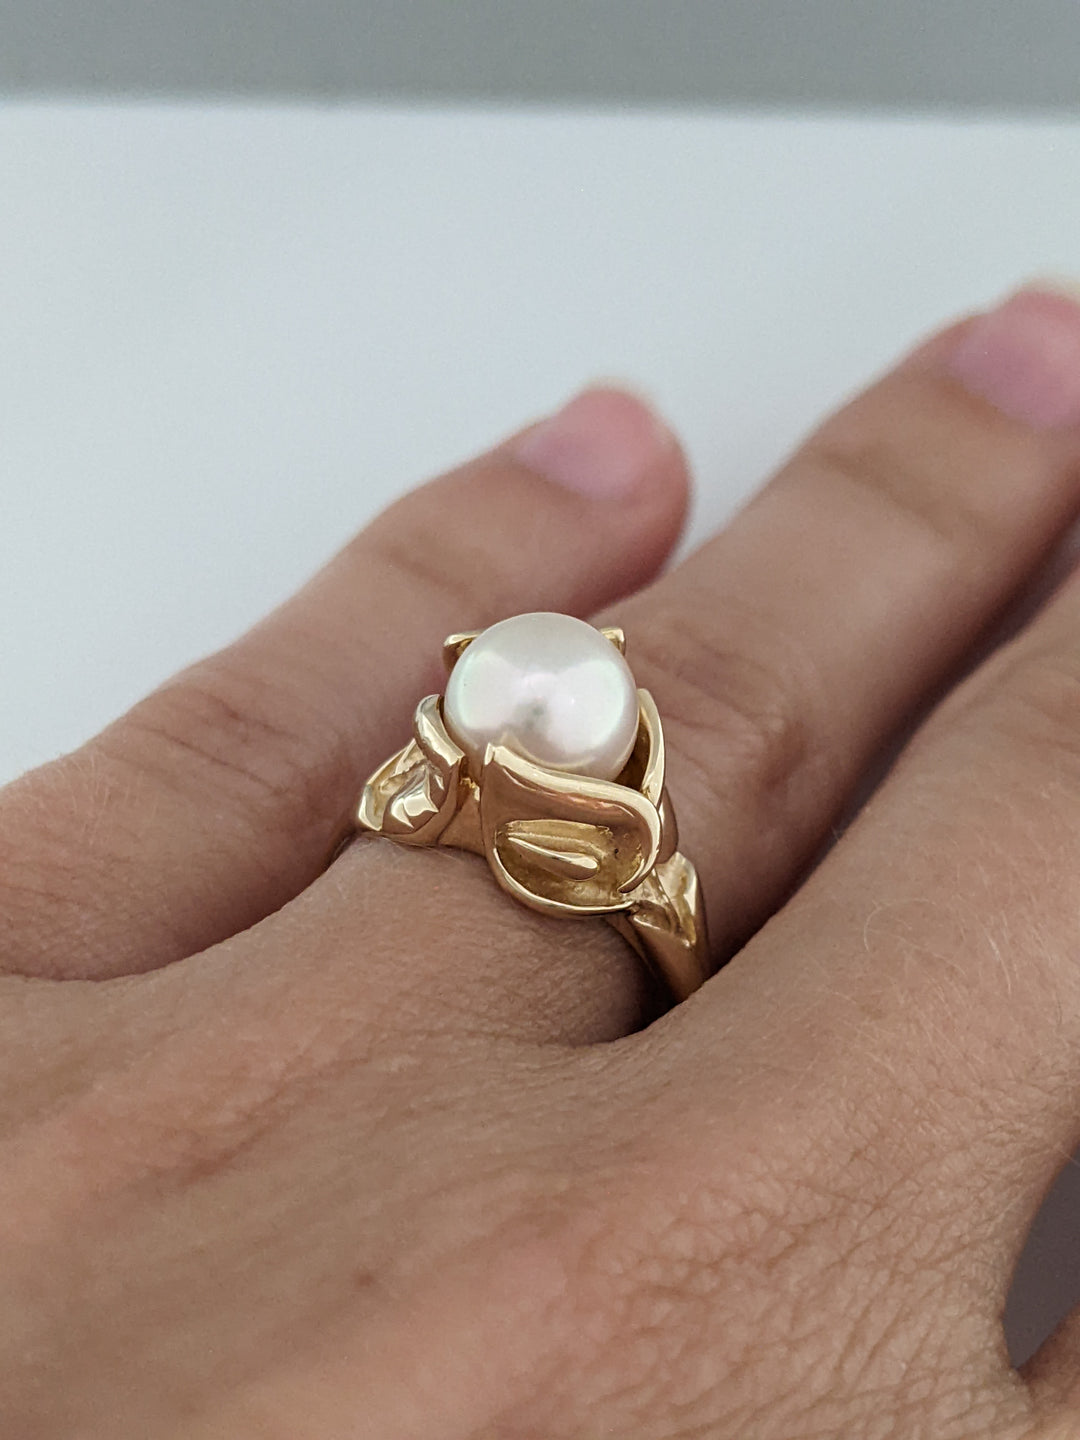 14K PEARL ROUND 7.5MM FREE FORM ESTATE RING 4.9 GRAMS